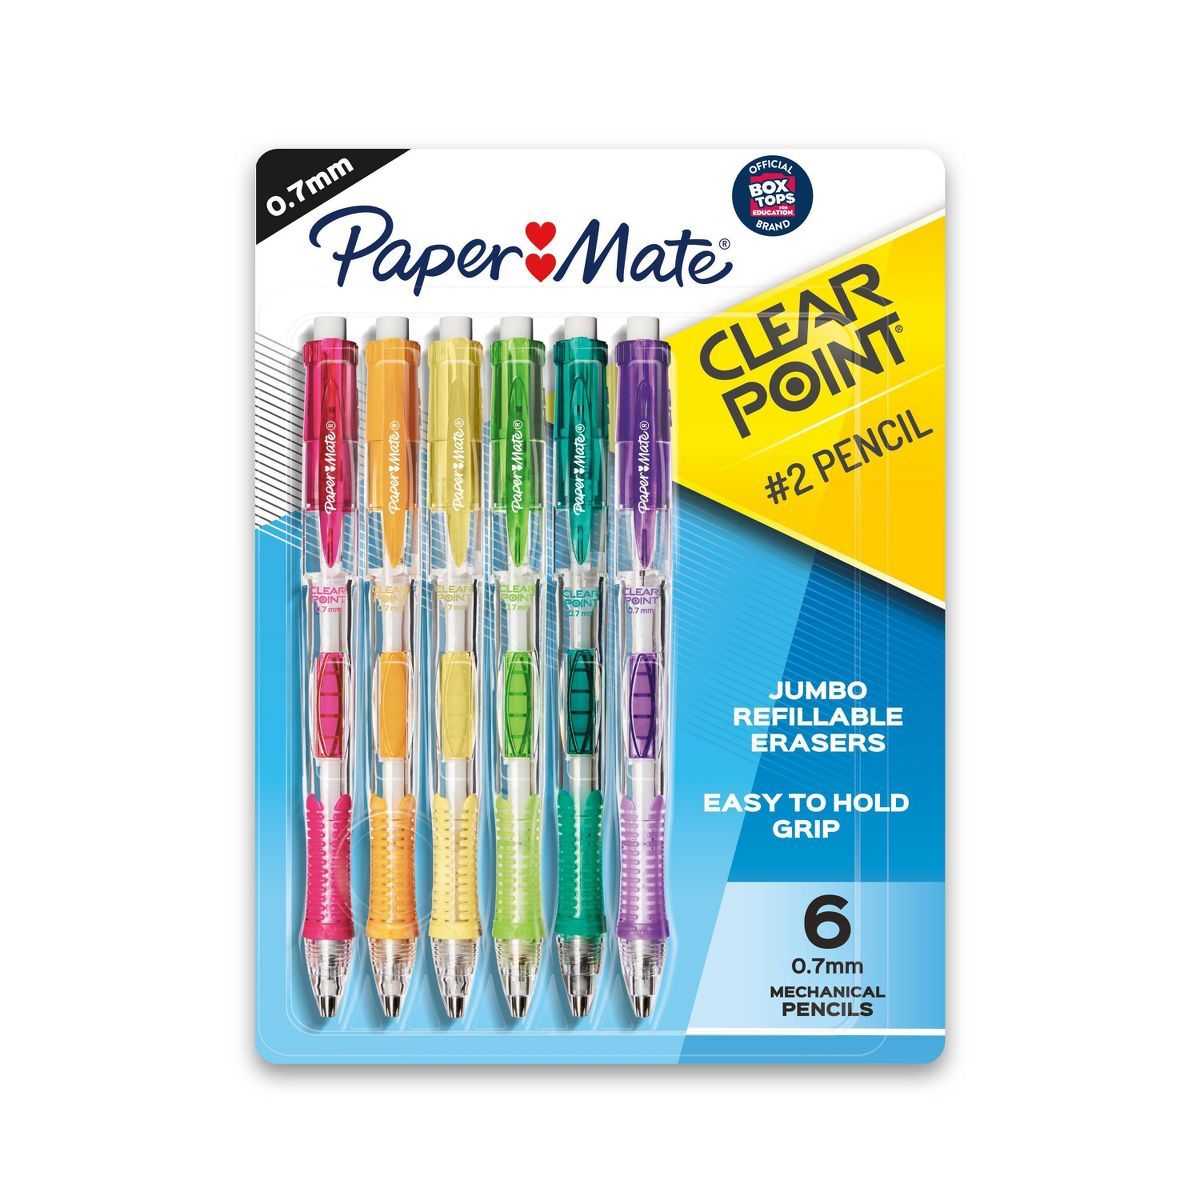 Paper Mate Clear Point 6pk #2 Mechanical Pencils 0.7mm Multicolored | Target